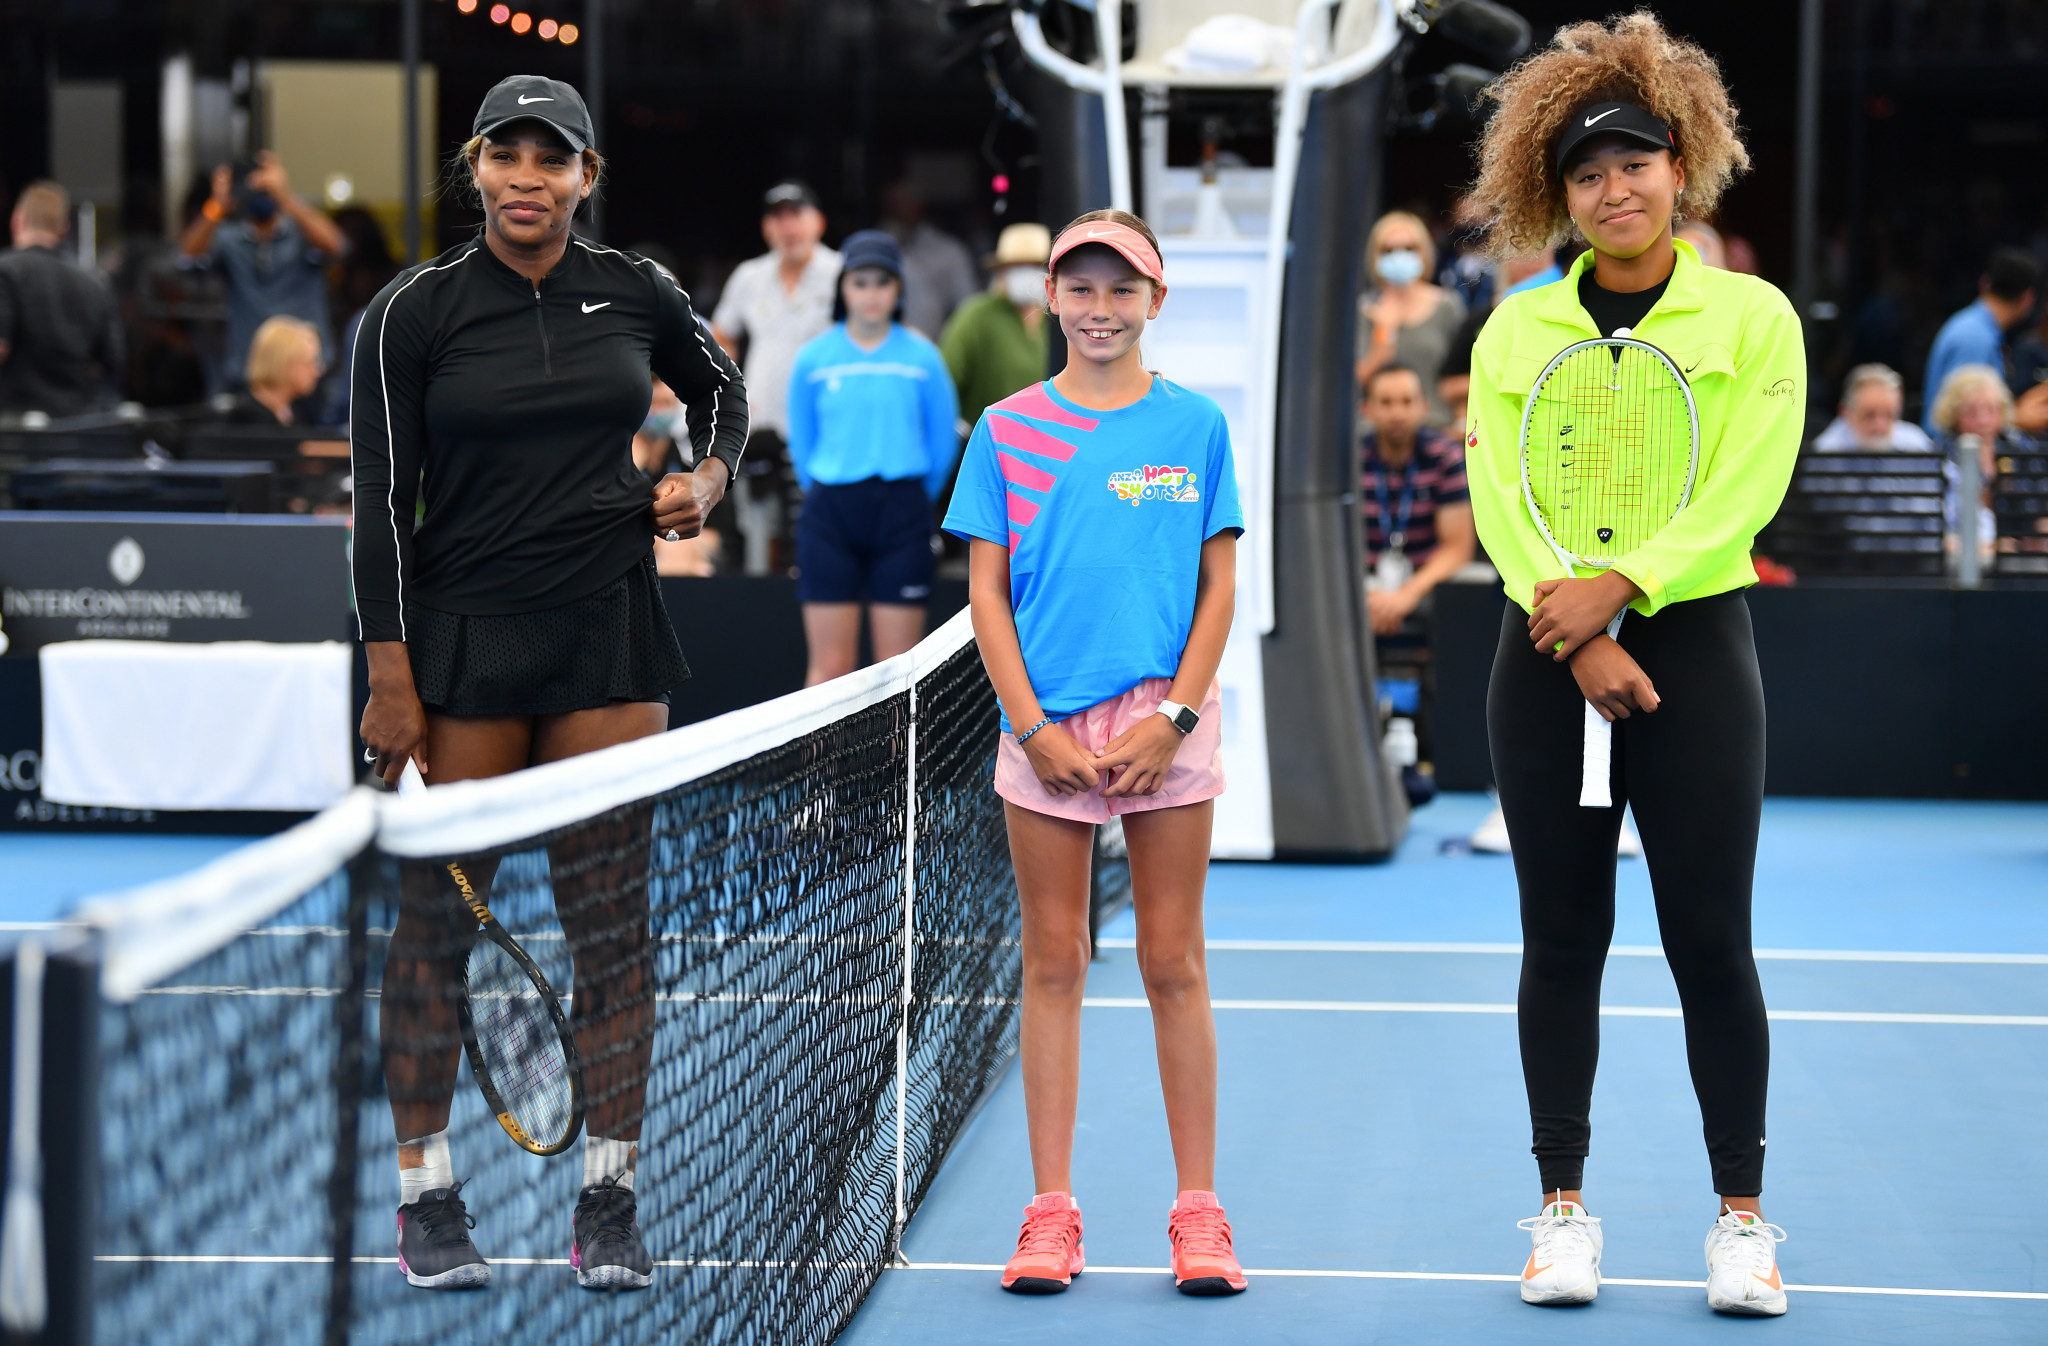 Naomi Osaka, right, competed against Serena Williams in an exhibition event in Adelaide ahead of the Australian Open ©Getty Images